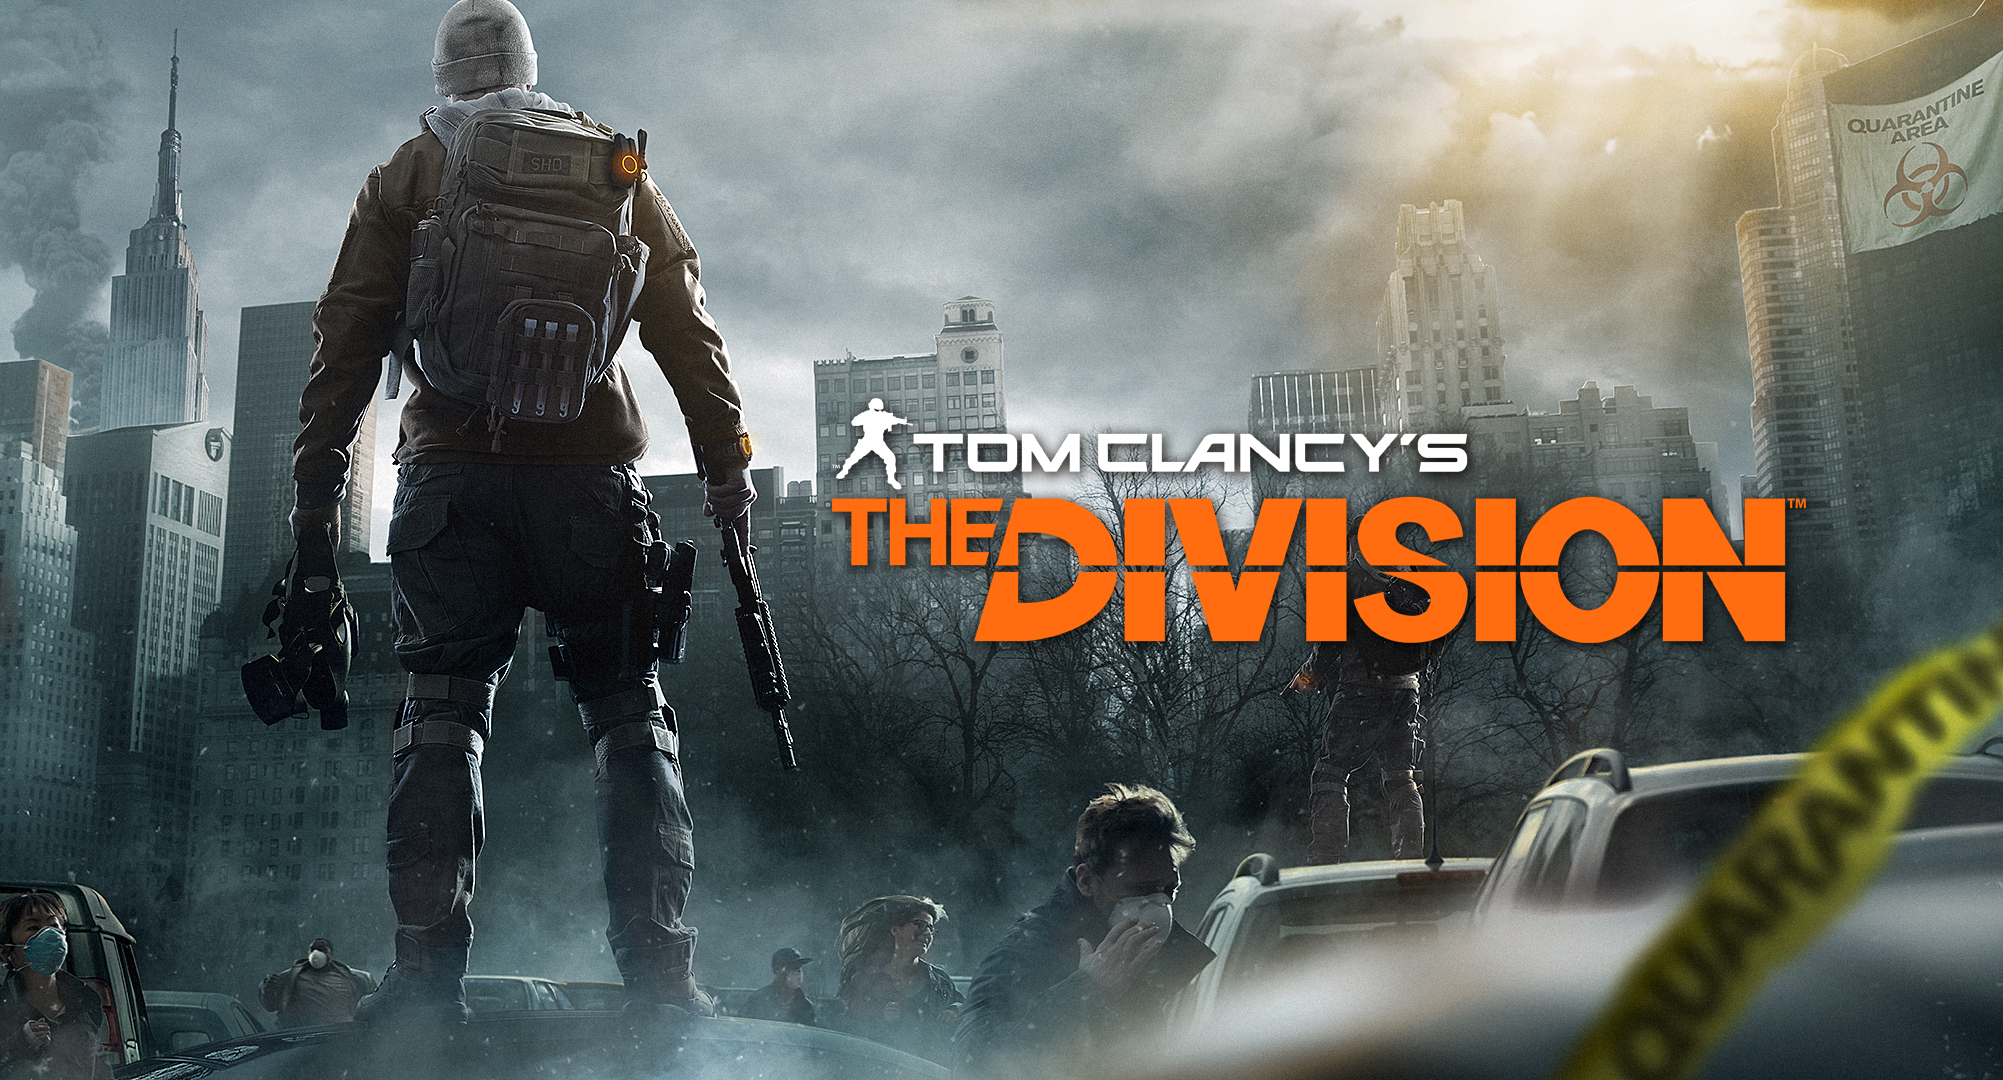 The Division: A short Spring Break distraction